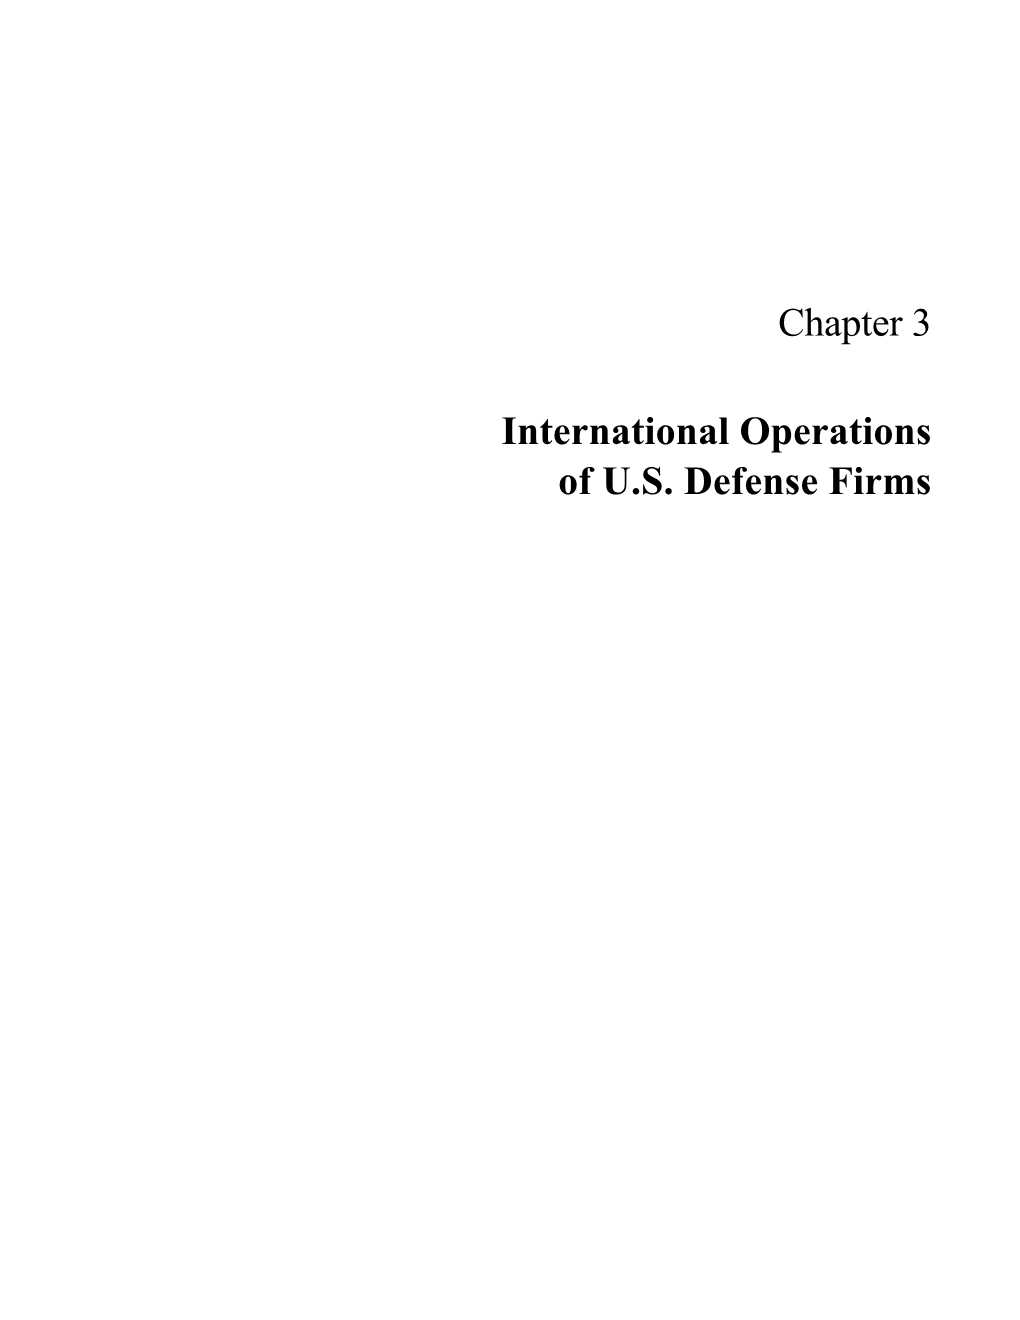 International Operations of US Defense Firms